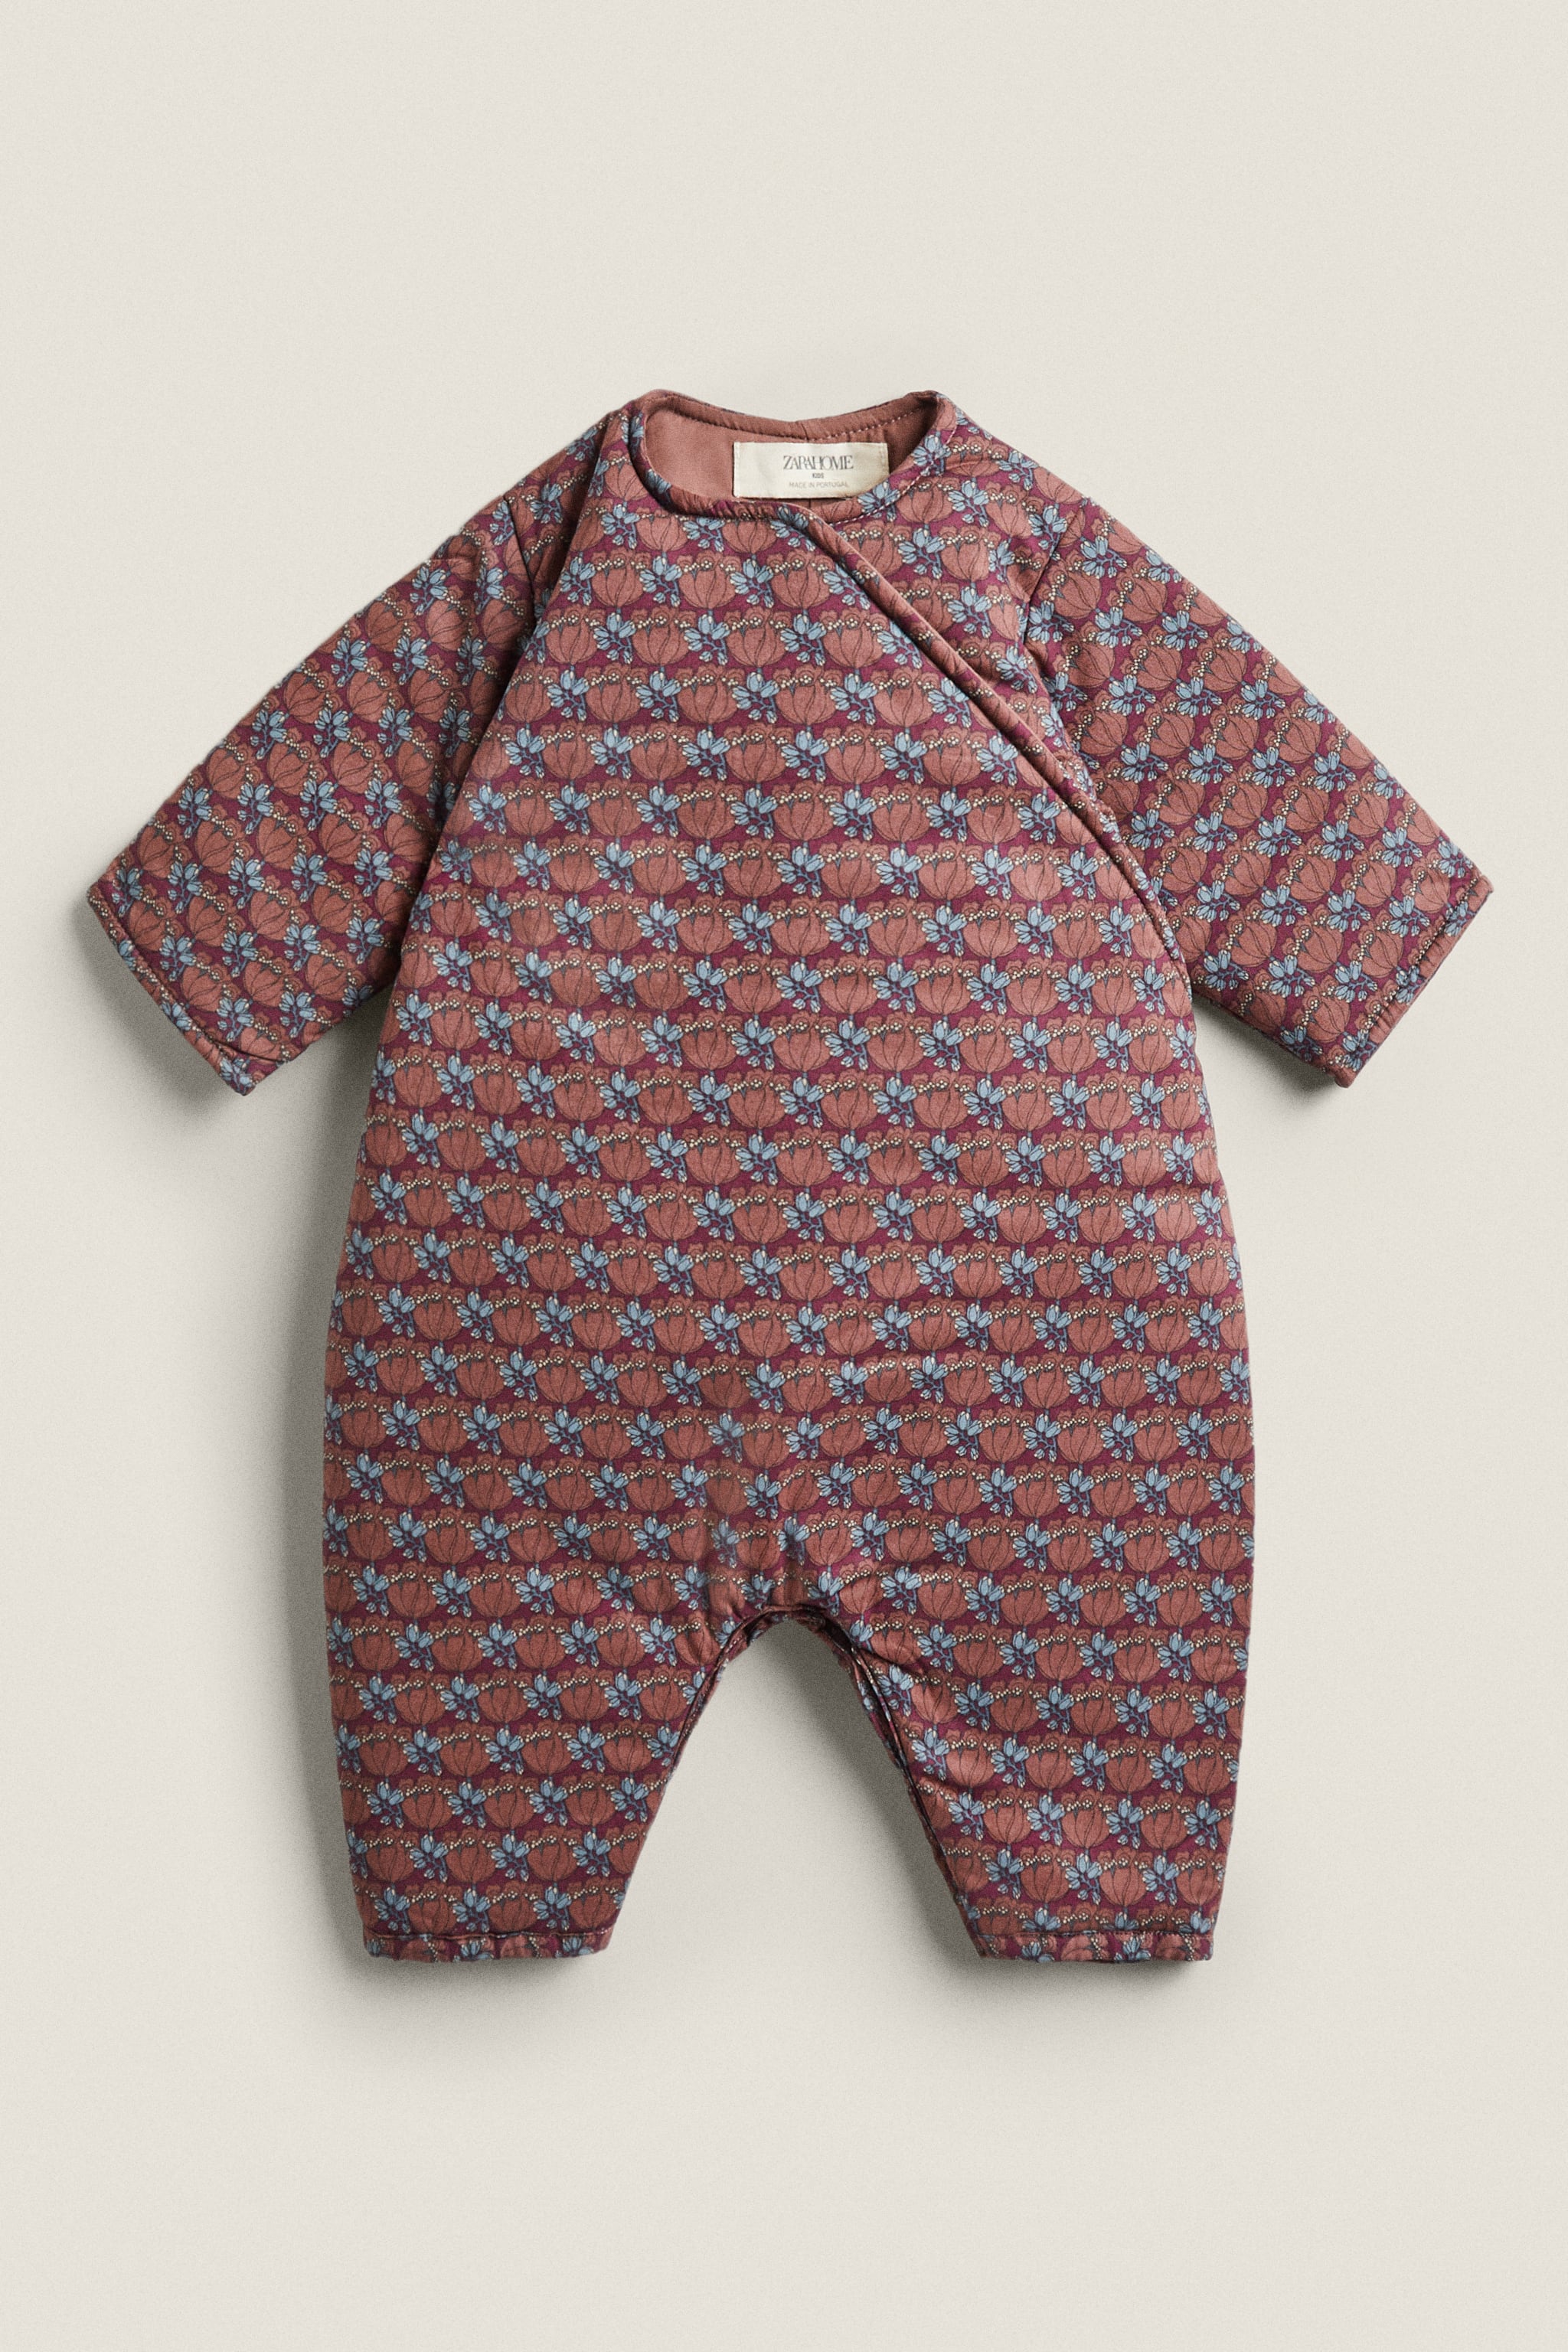 CHILDREN'S BODYSUIT MADE WITH LIBERTY FABRIC